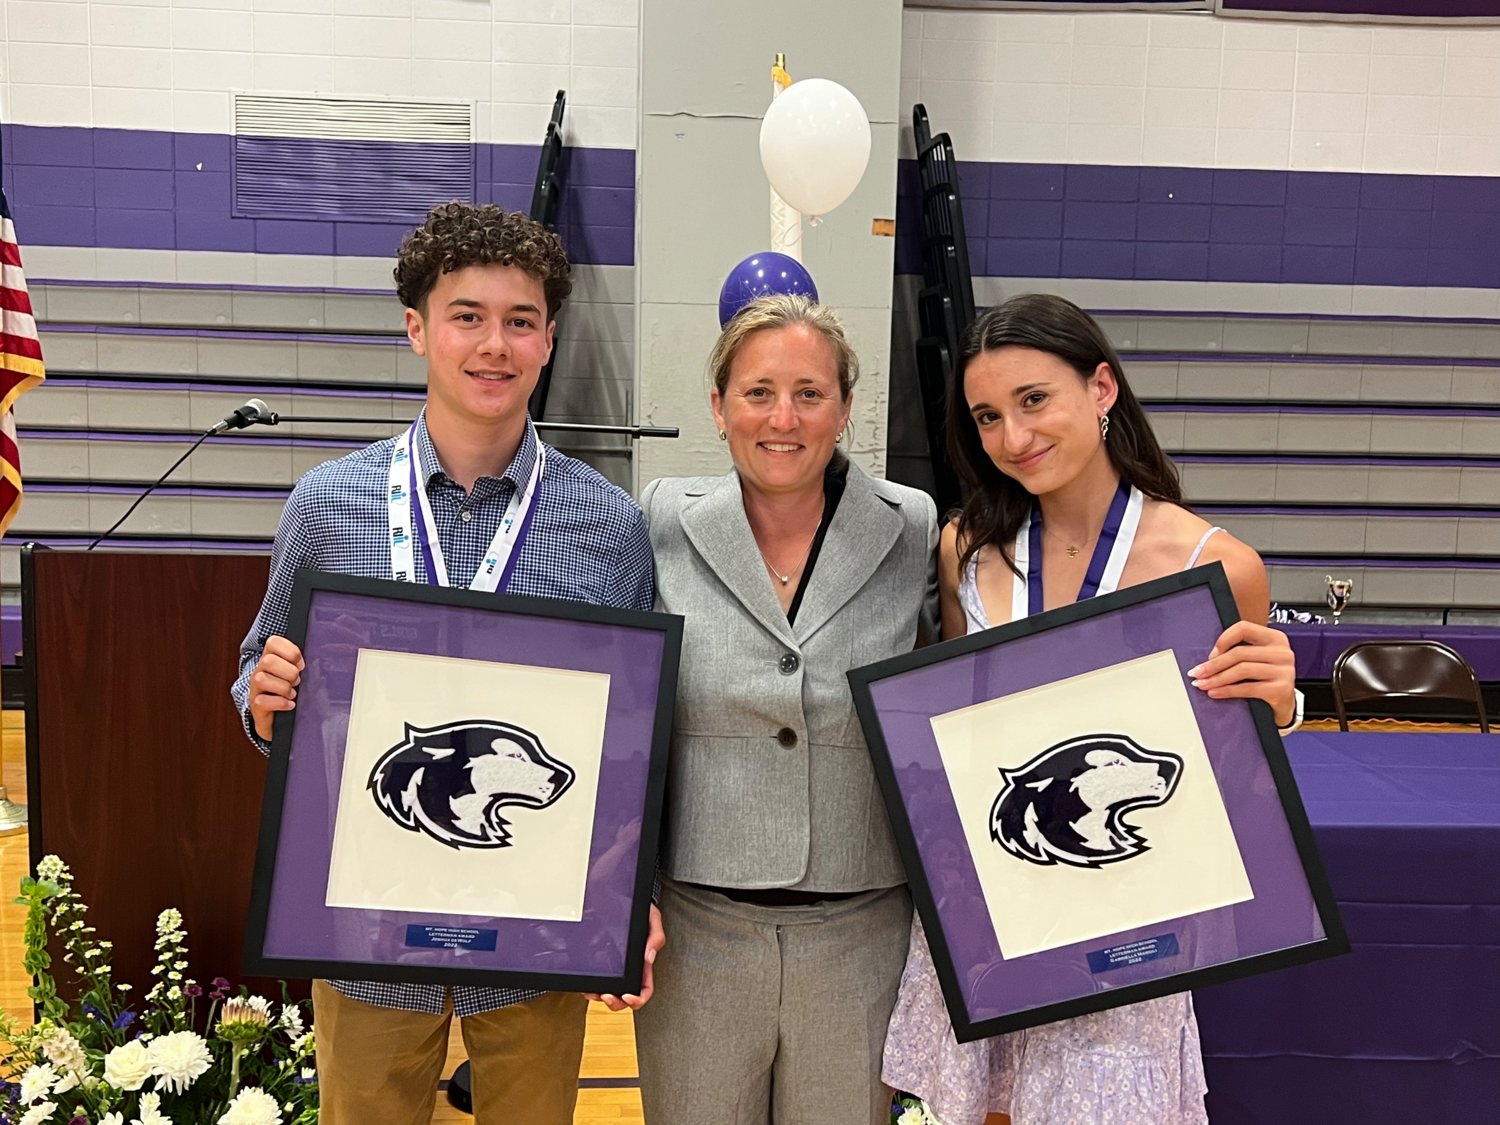 Joshua deWolf (Cross-Country, Basketball, Lacrosse) and Gabriella Marsili (Cross-Country, Indoor Track, Outdoor Track) received Mt Hope’s Letterman Award, created in 2014 and bestowed upon students who earn a varsity letter each year of the four years in school.